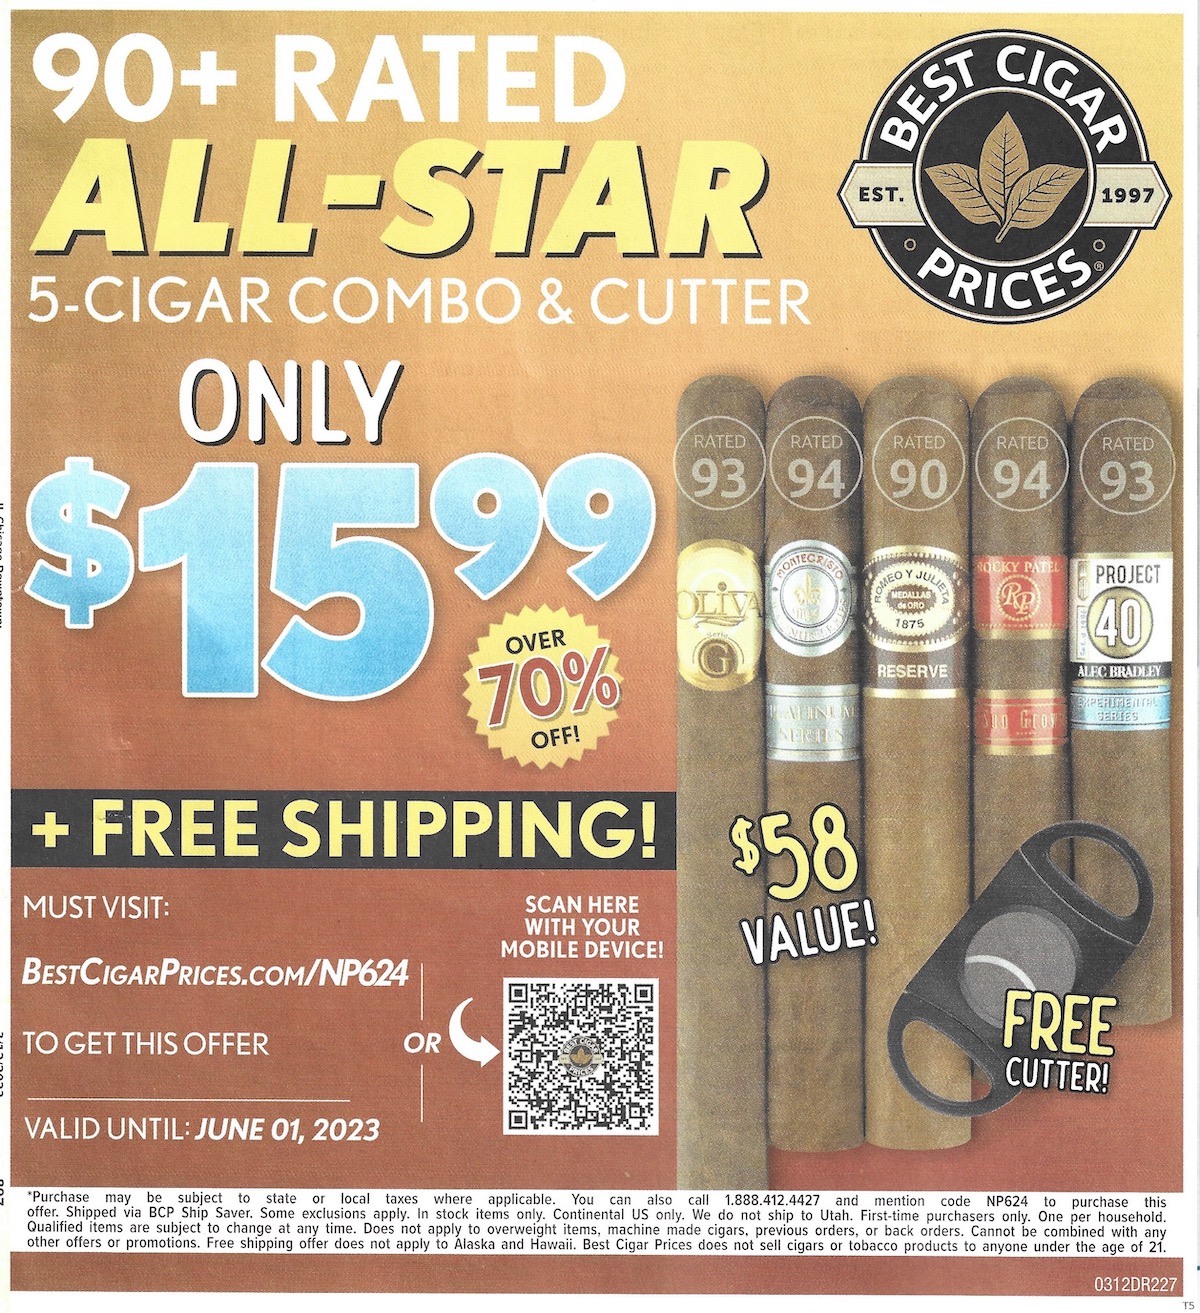 Best Cigar Prices Coupon Code - March 2023